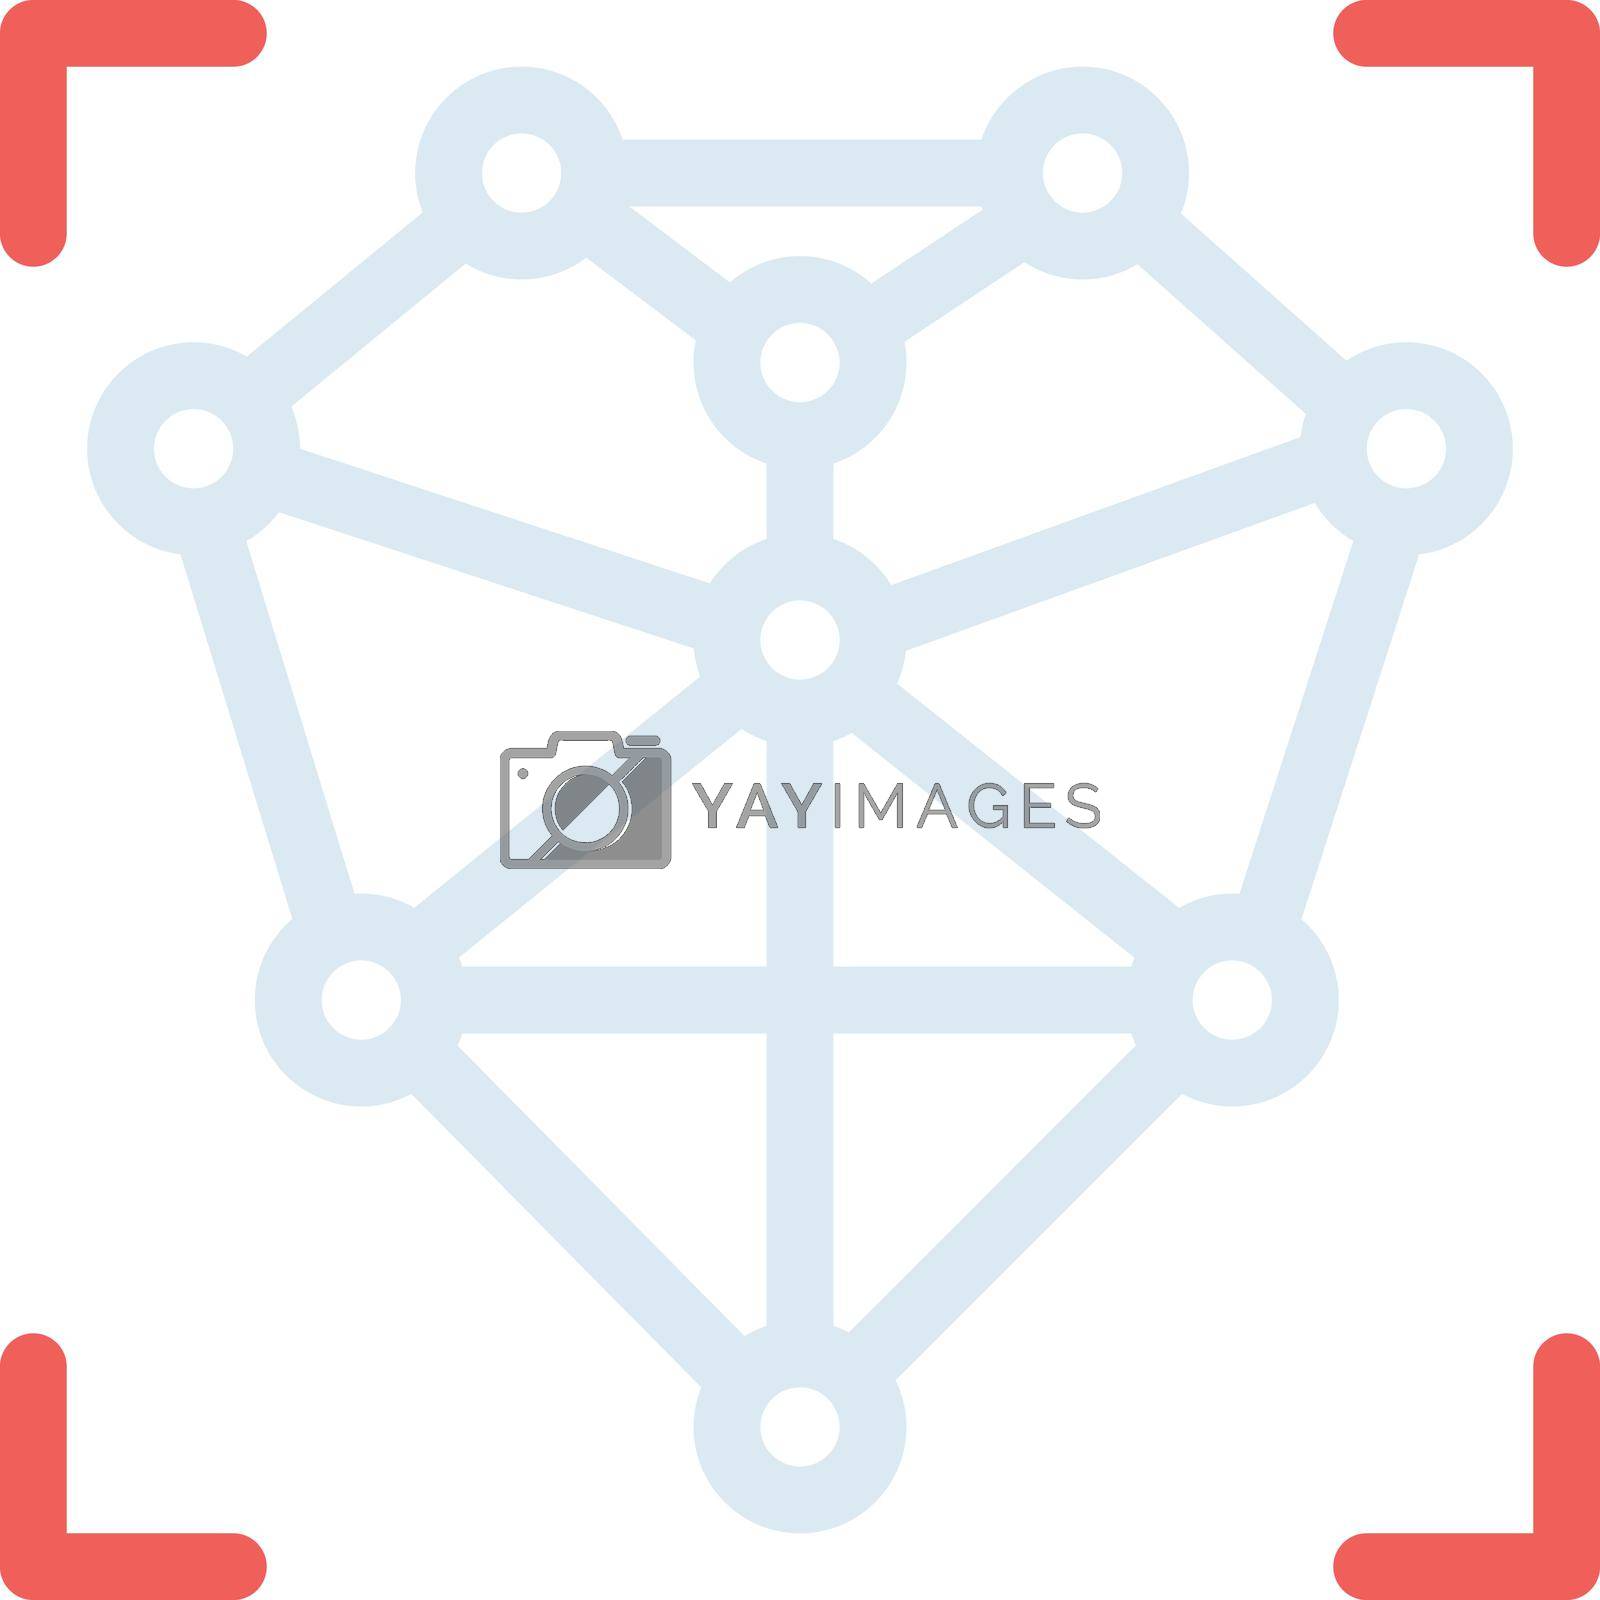 Royalty free image of molecule by FlaticonsDesign